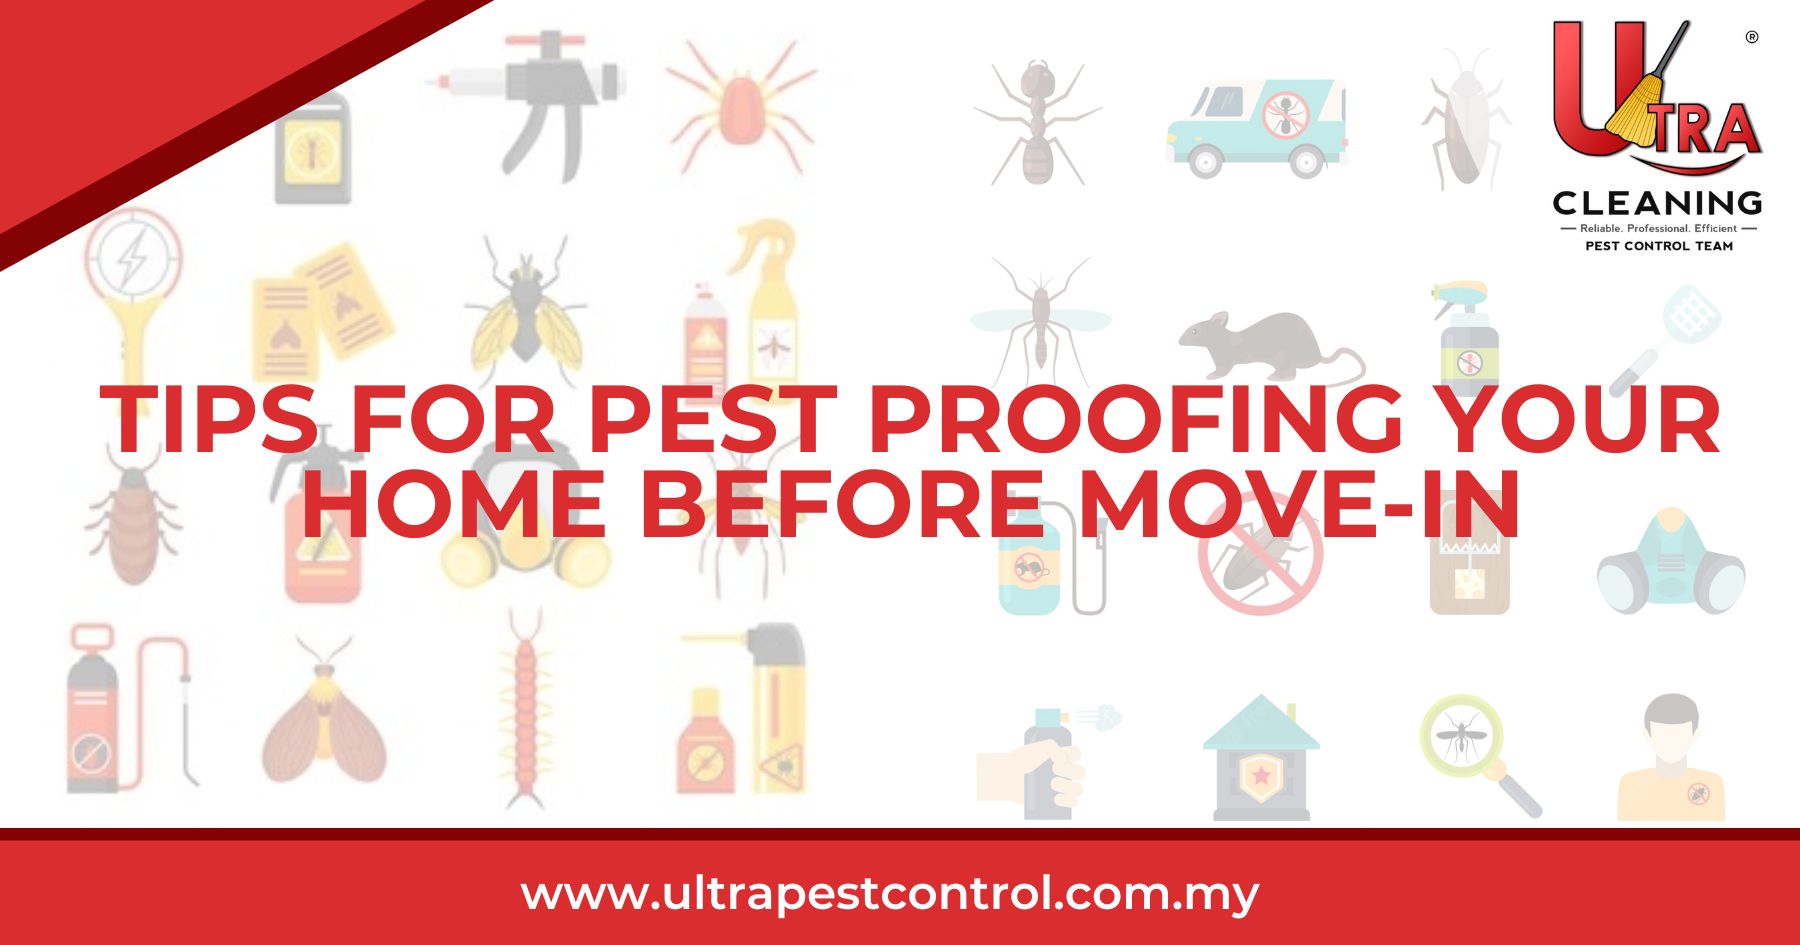 You are currently viewing Tips for Pest Proofing Your Home Before Move-In